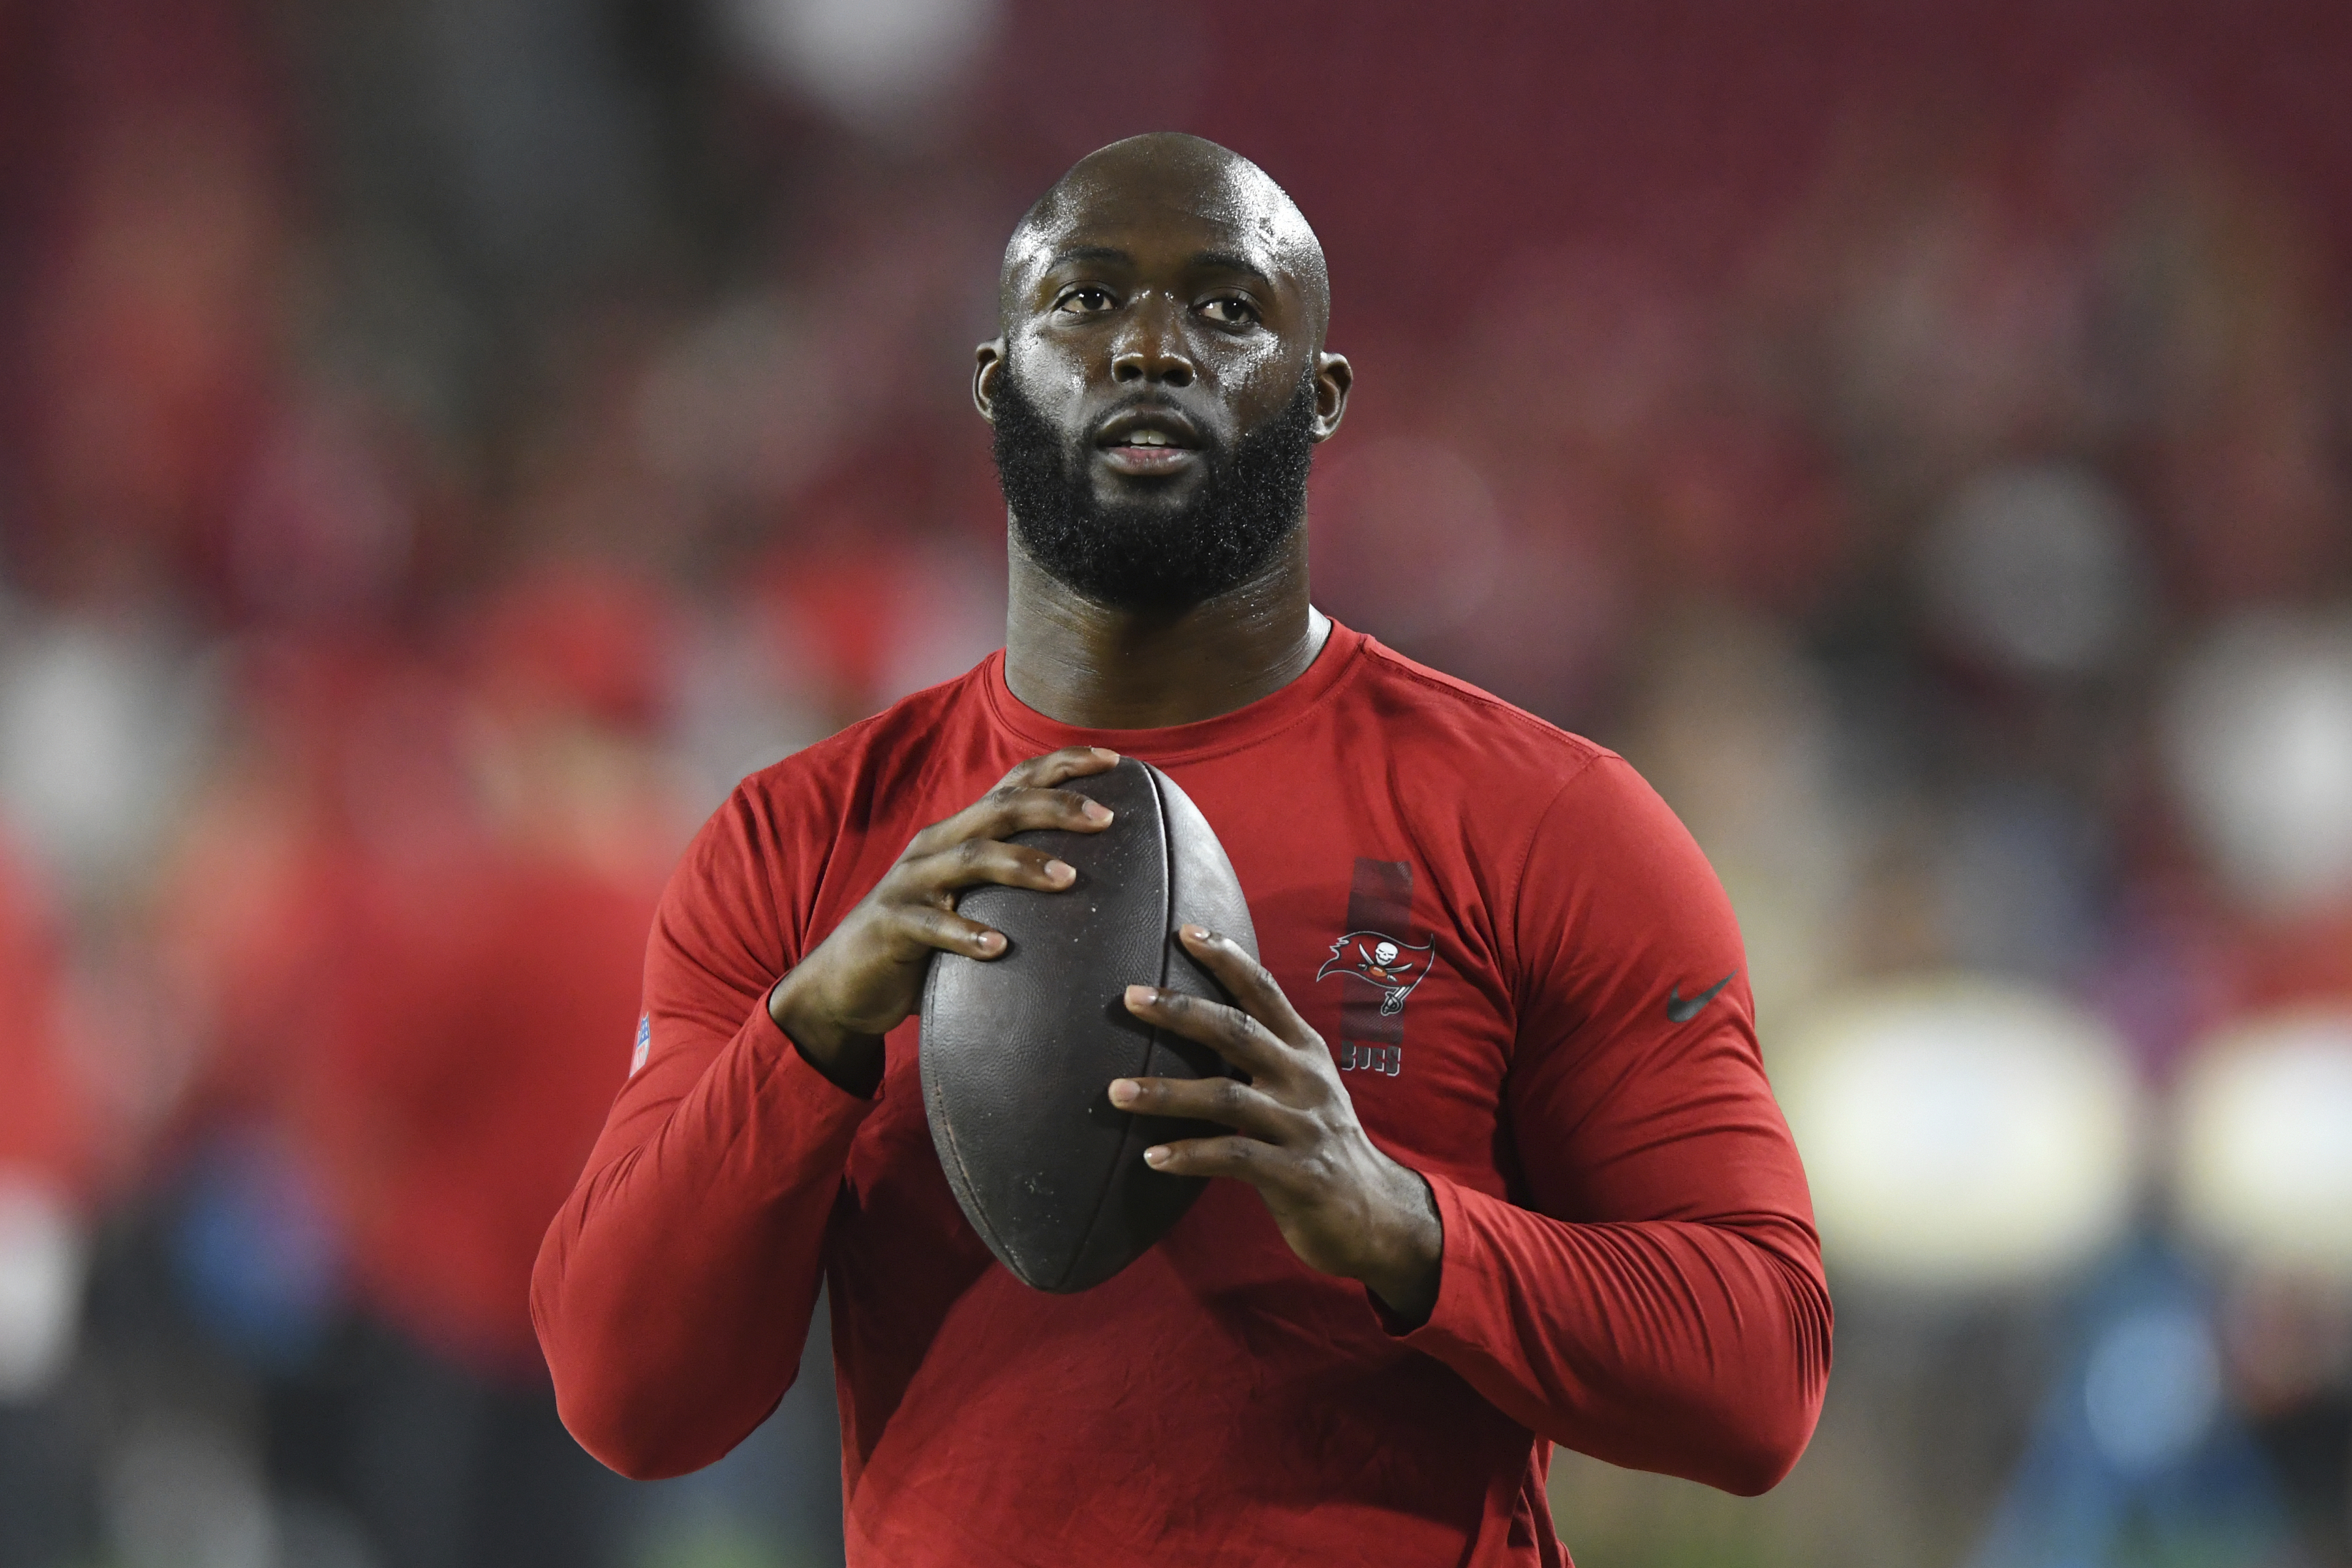 Report: Bucs' Leonard Fournette Activated off Injured Reserve, Will Play vs. Rams